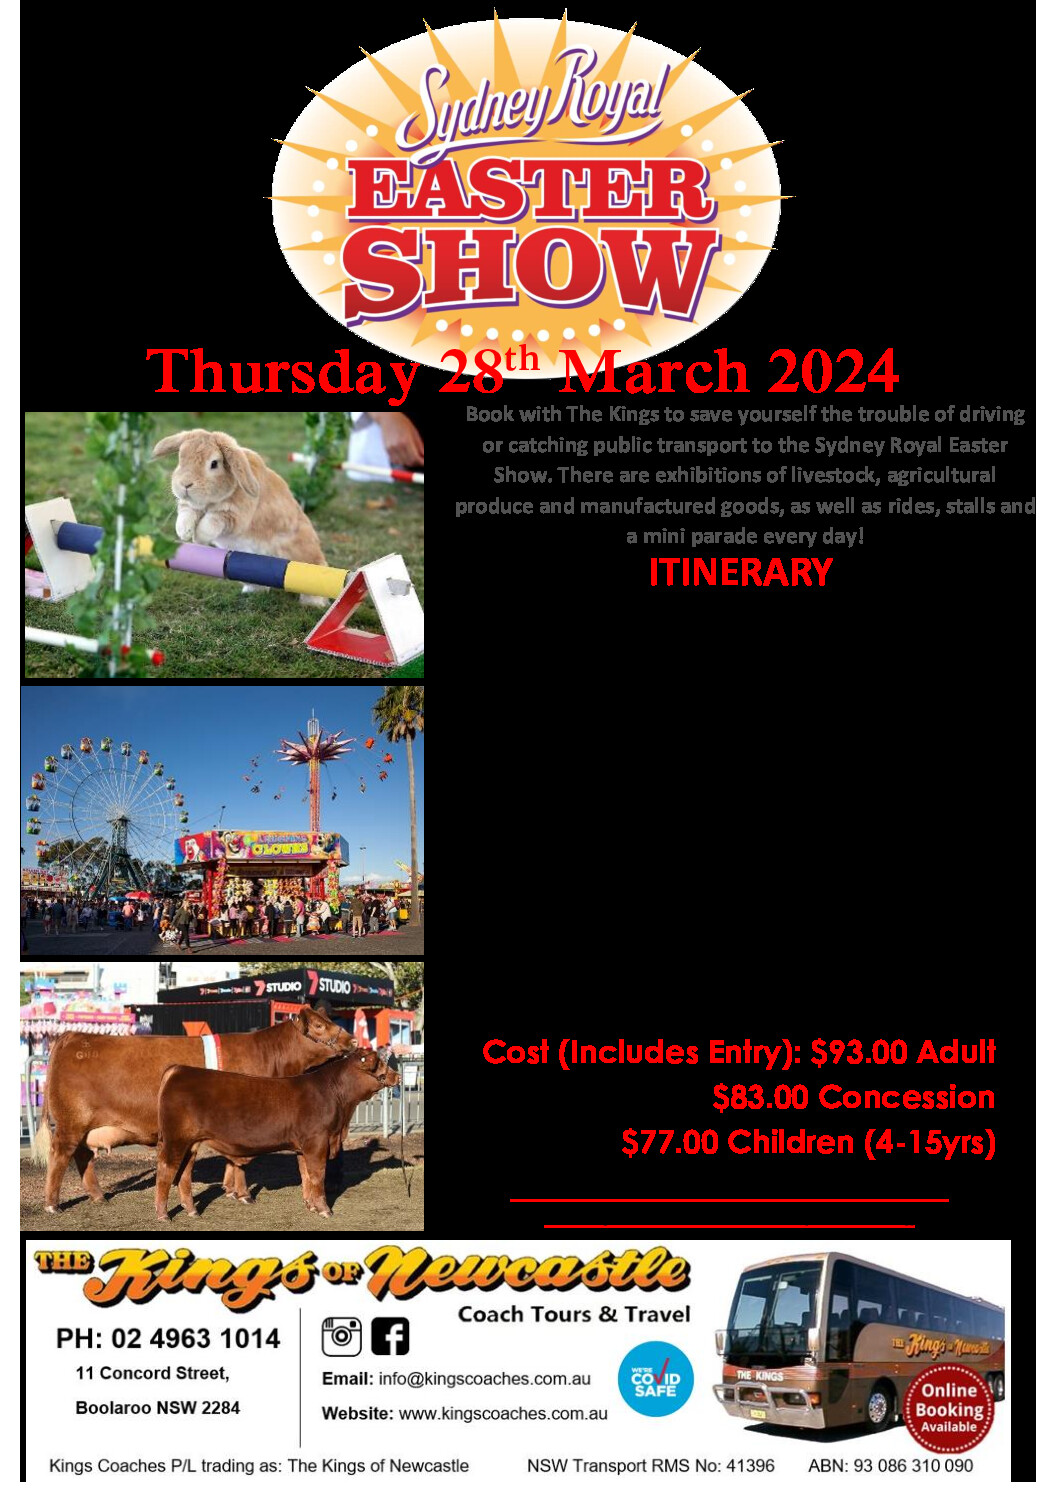 royal easter show 2024 itinerary Kings Coaches